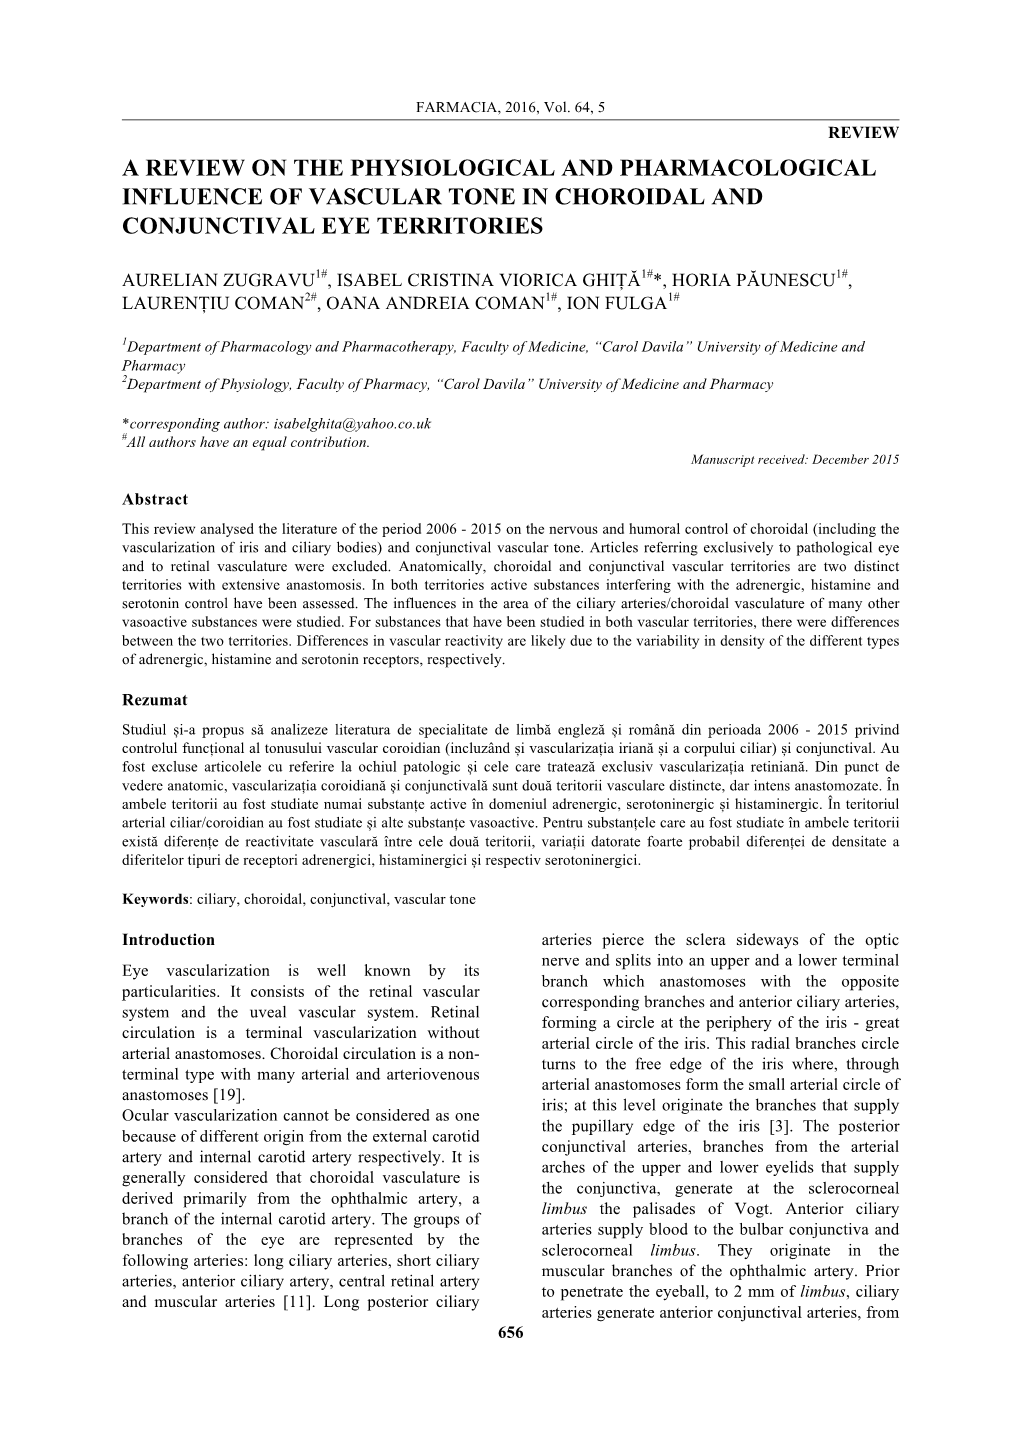 A Review on the Physiological and Pharmacological Influence of Vascular Tone in Choroidal and Conjunctival Eye Territories